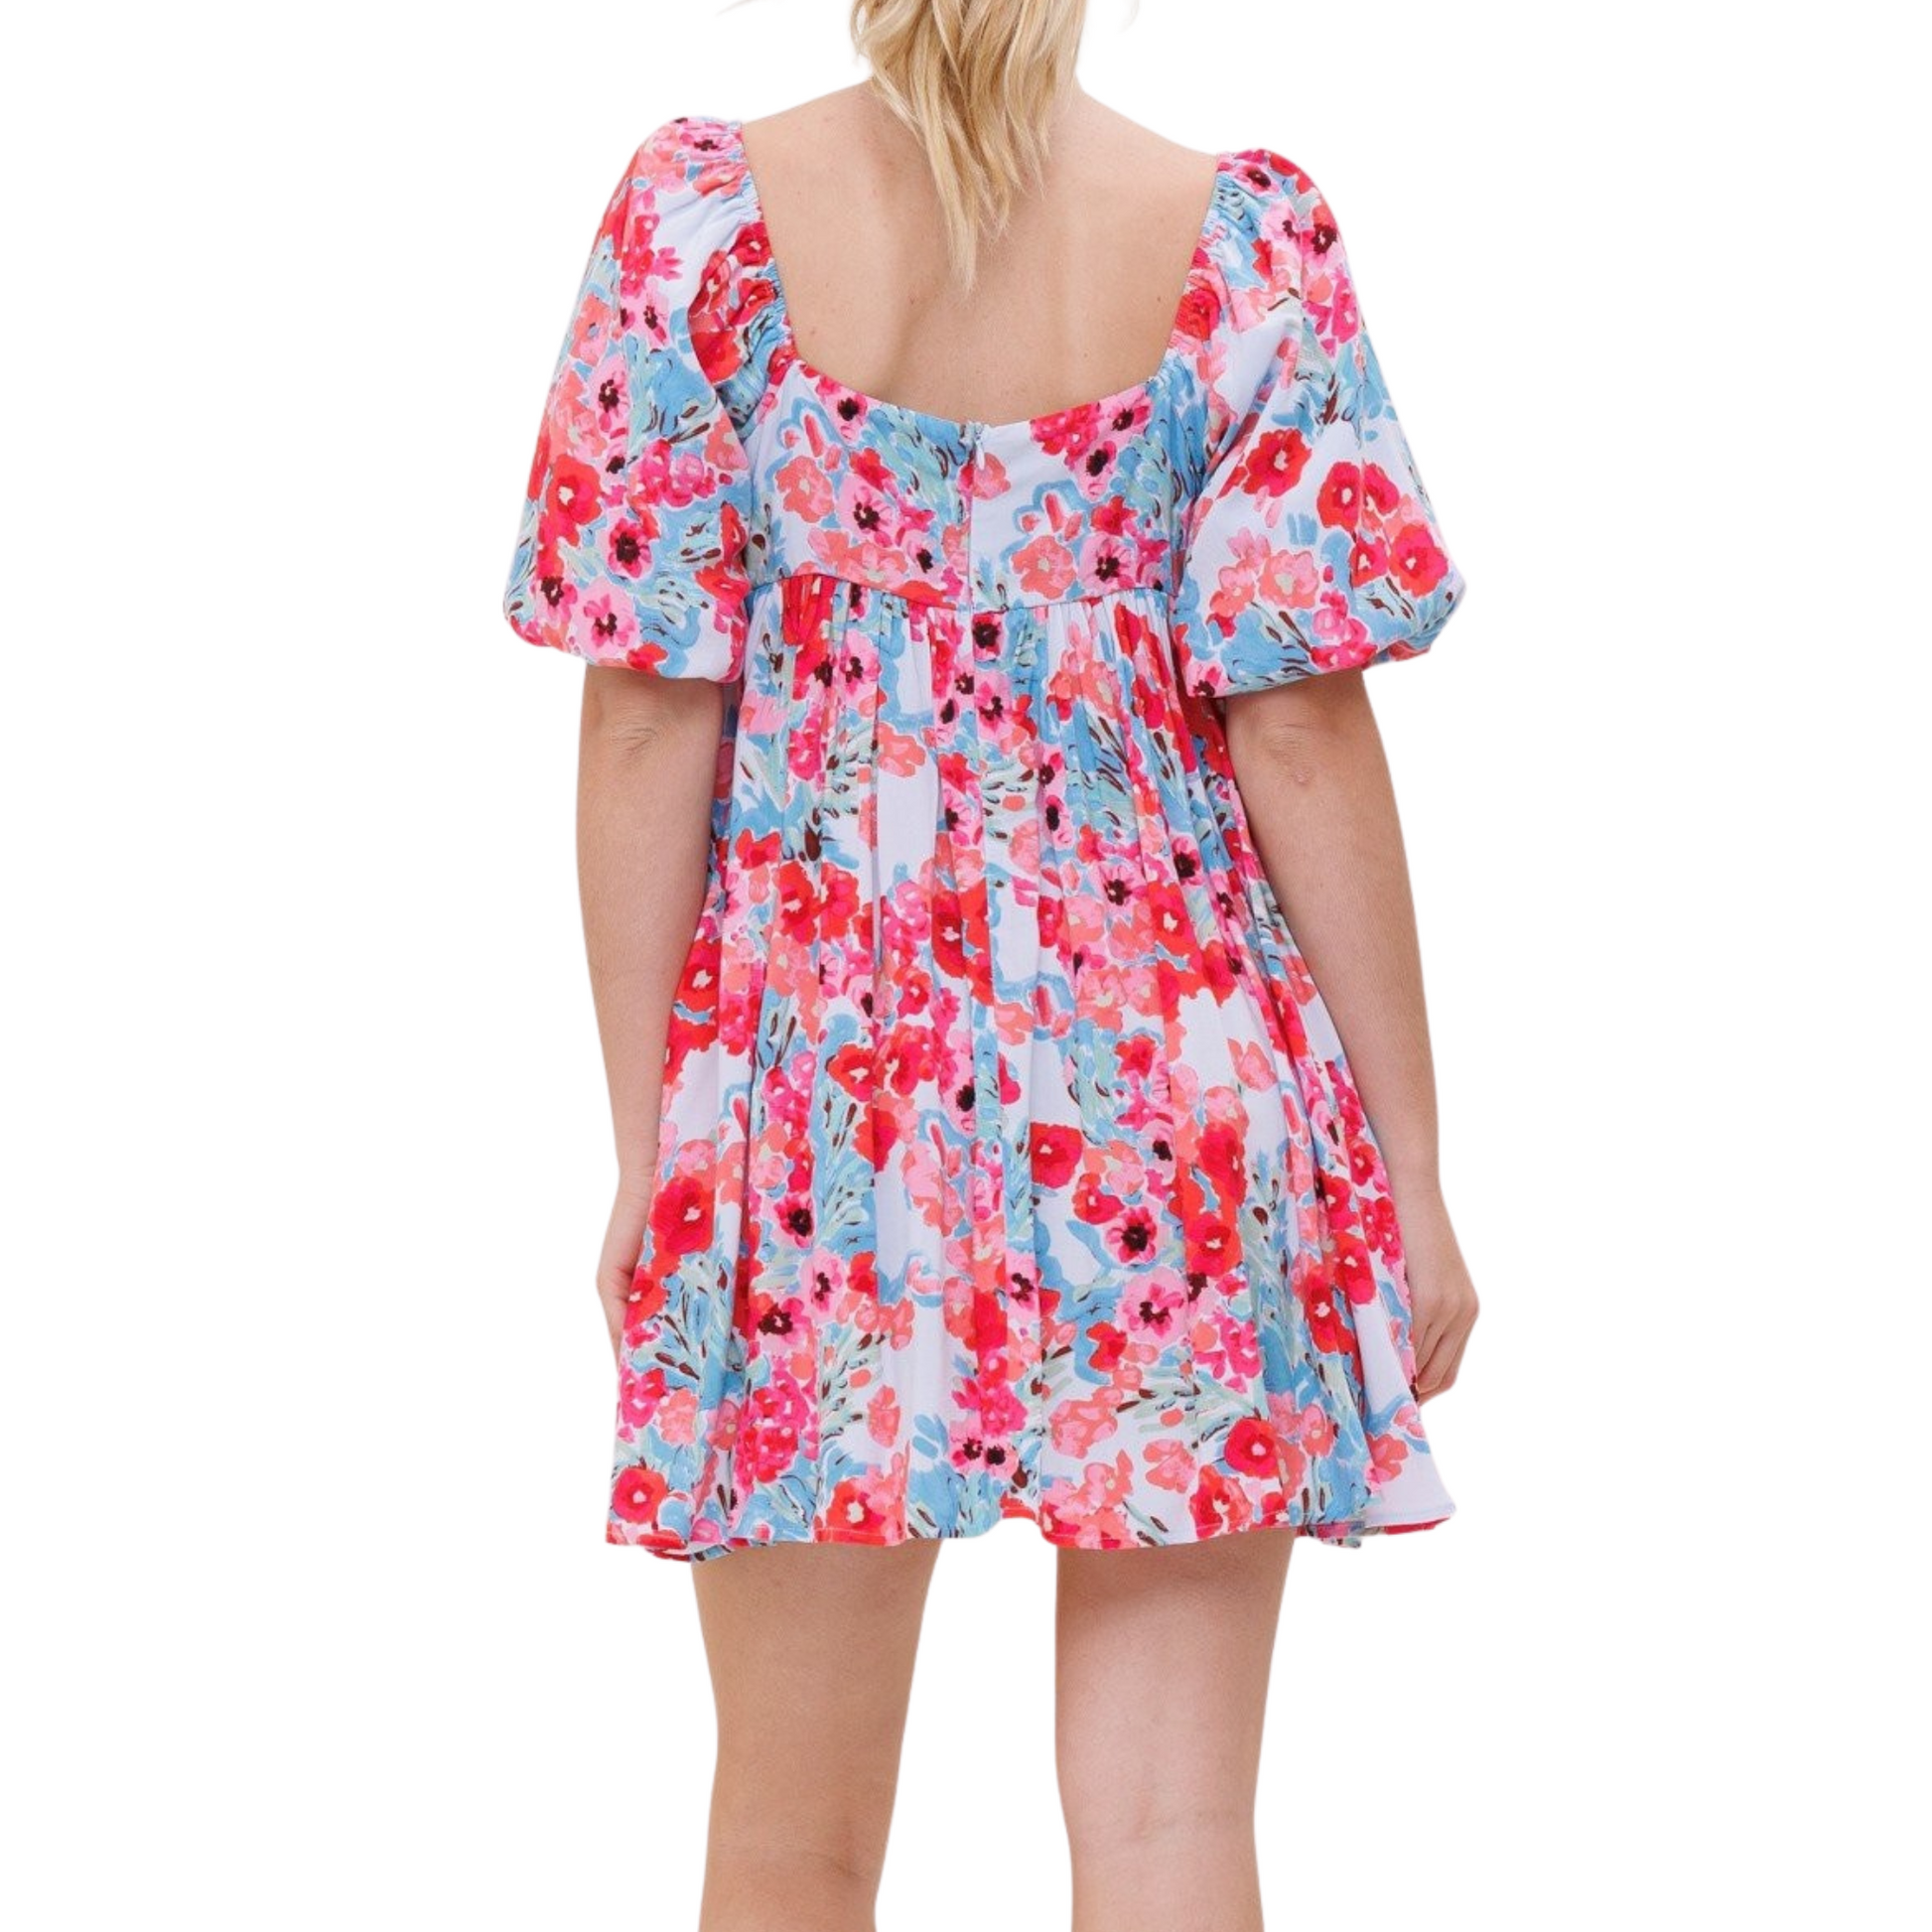 Pink, blue and white floral mini dress with balloon sleeves and square back, worn by a woman from the back.